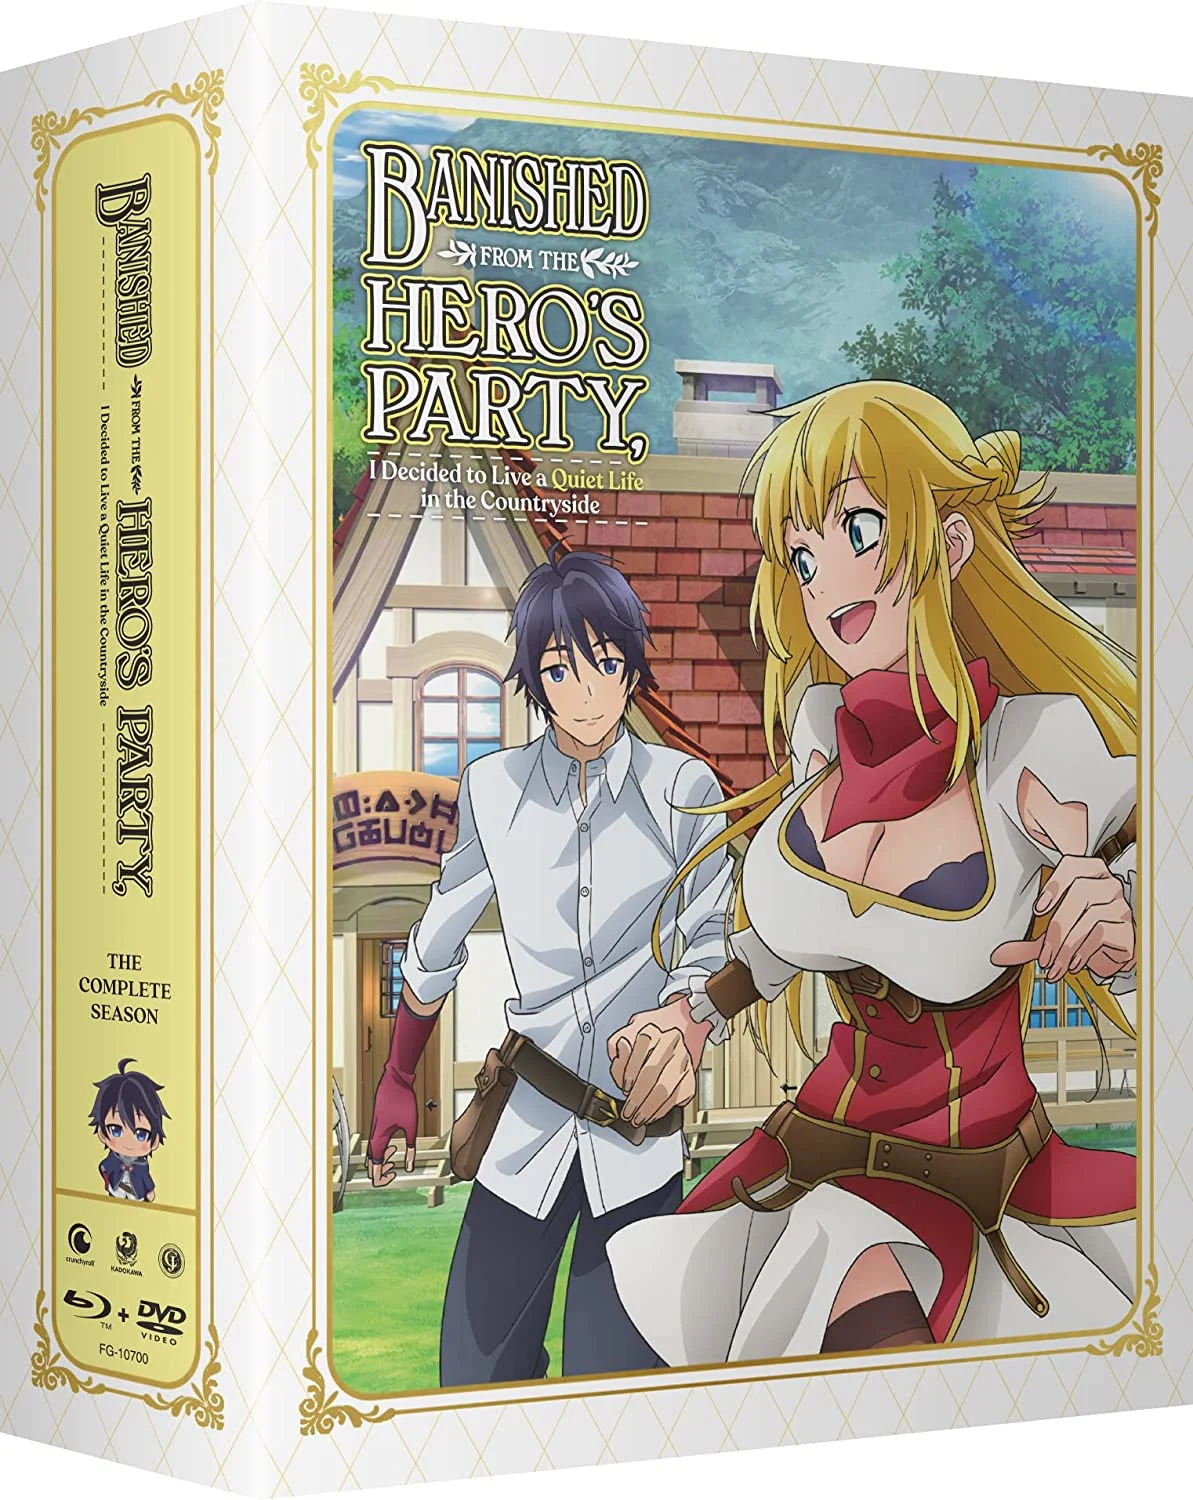 Banished from the Hero’s Party I Decided to Live a Quiet Life…: (CS) Ltd Edit (Blu-ray/DVD Combo) on MovieShack